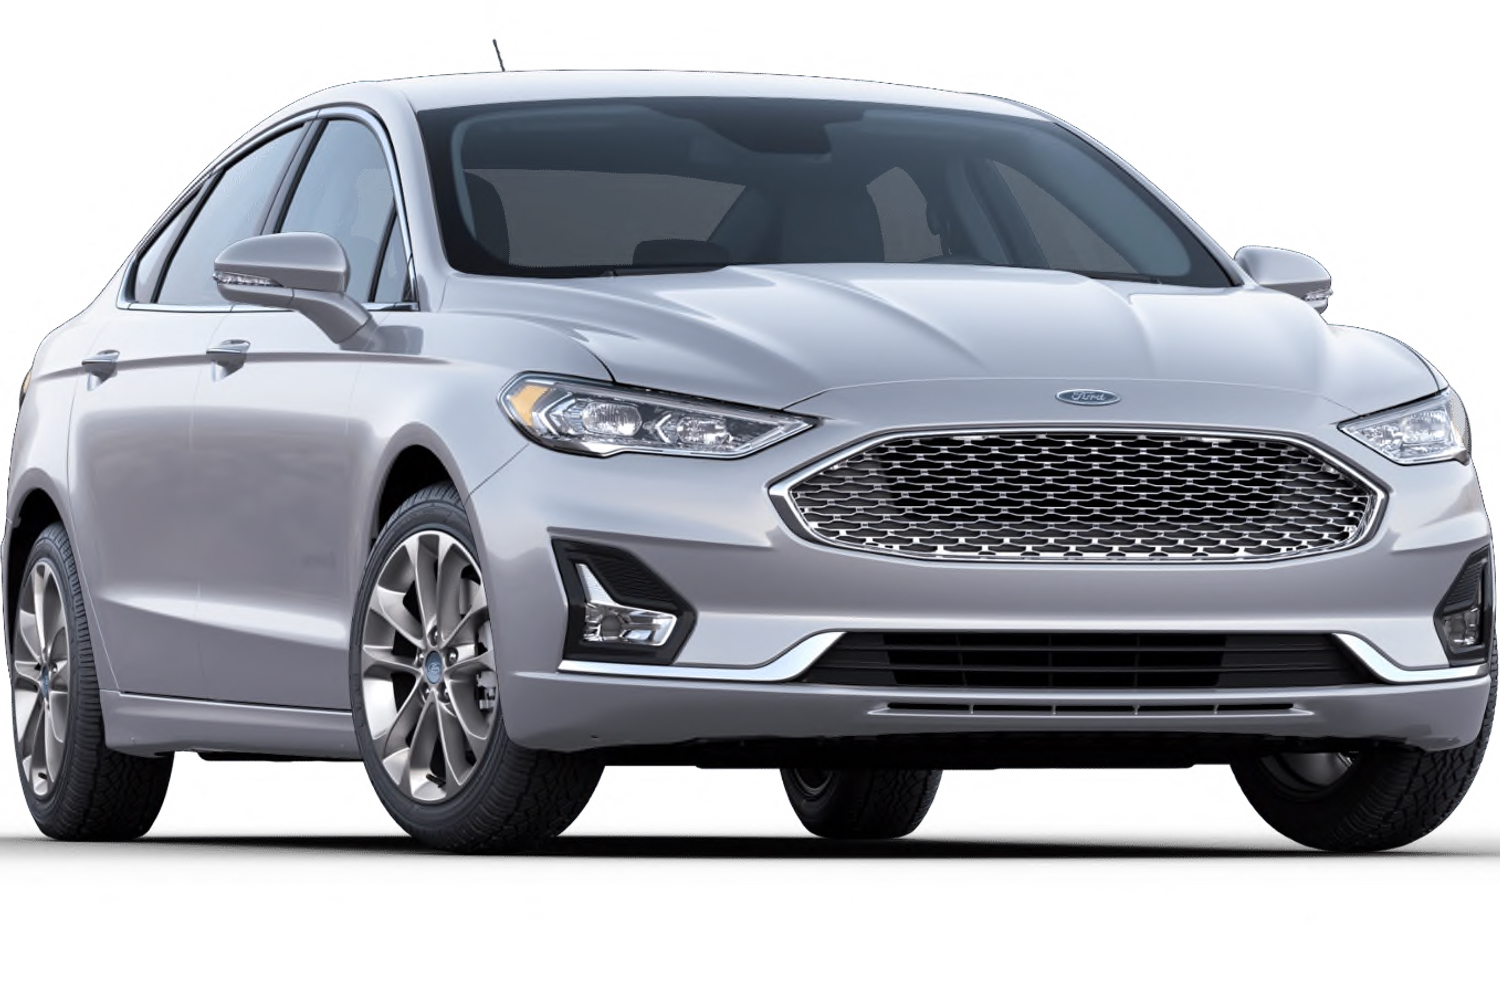 2020 Ford Fusion Iconic Silver JS 003